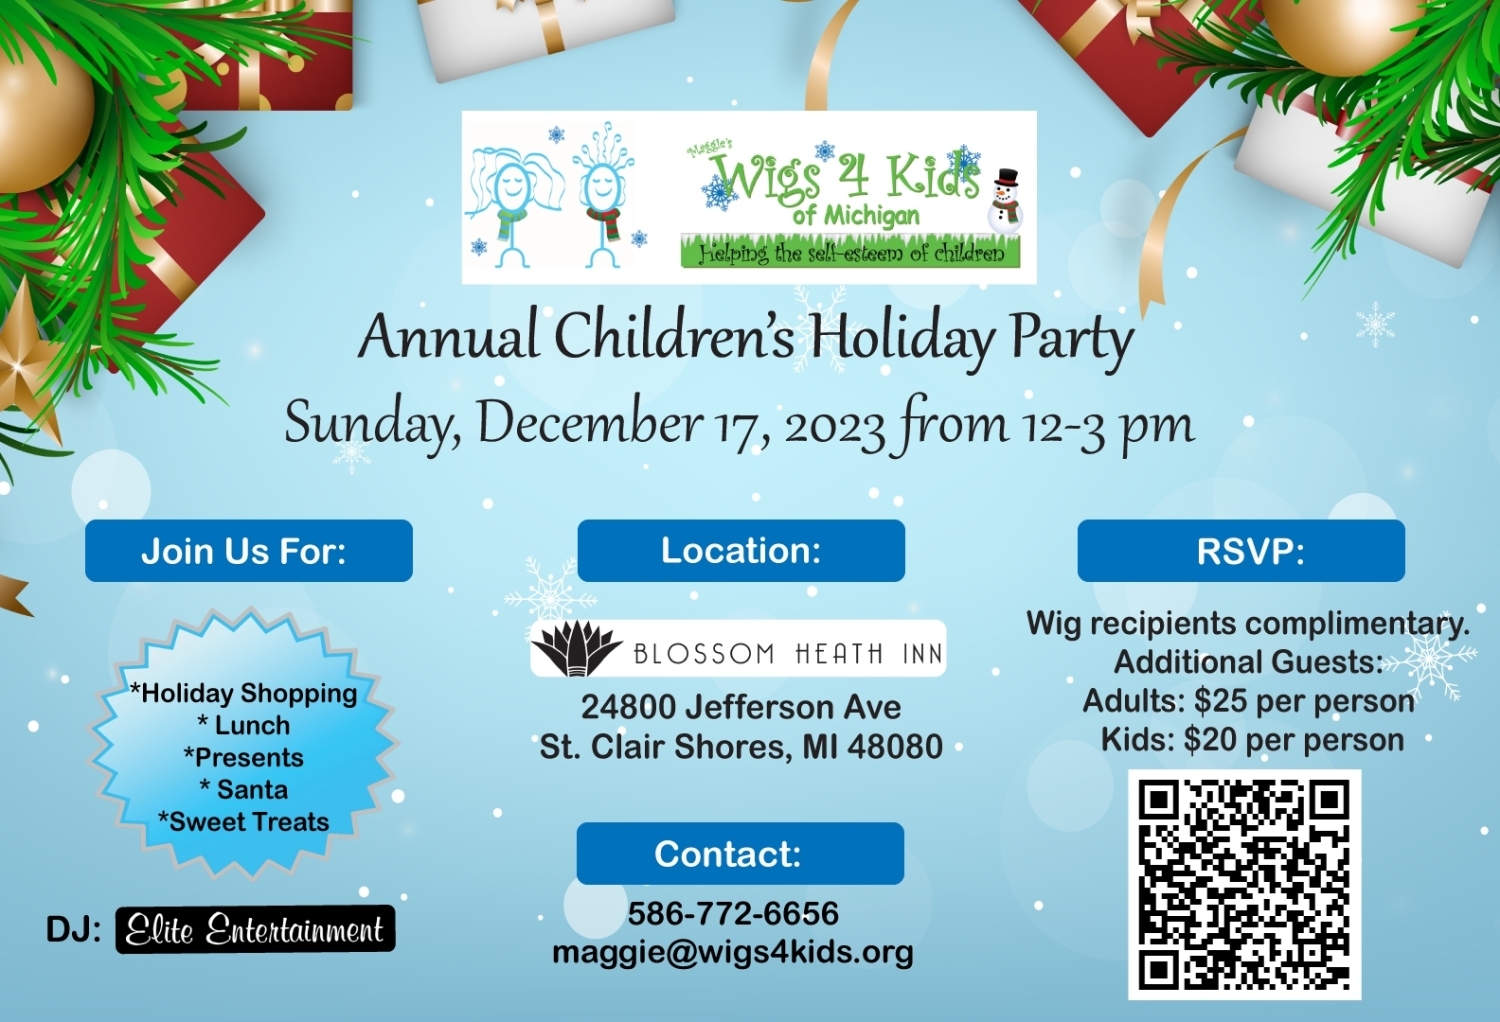 https://www.wigs4kids.org/cm/dpl/images/articles/2574/Holiday-Party-Invitation-2023.jpg